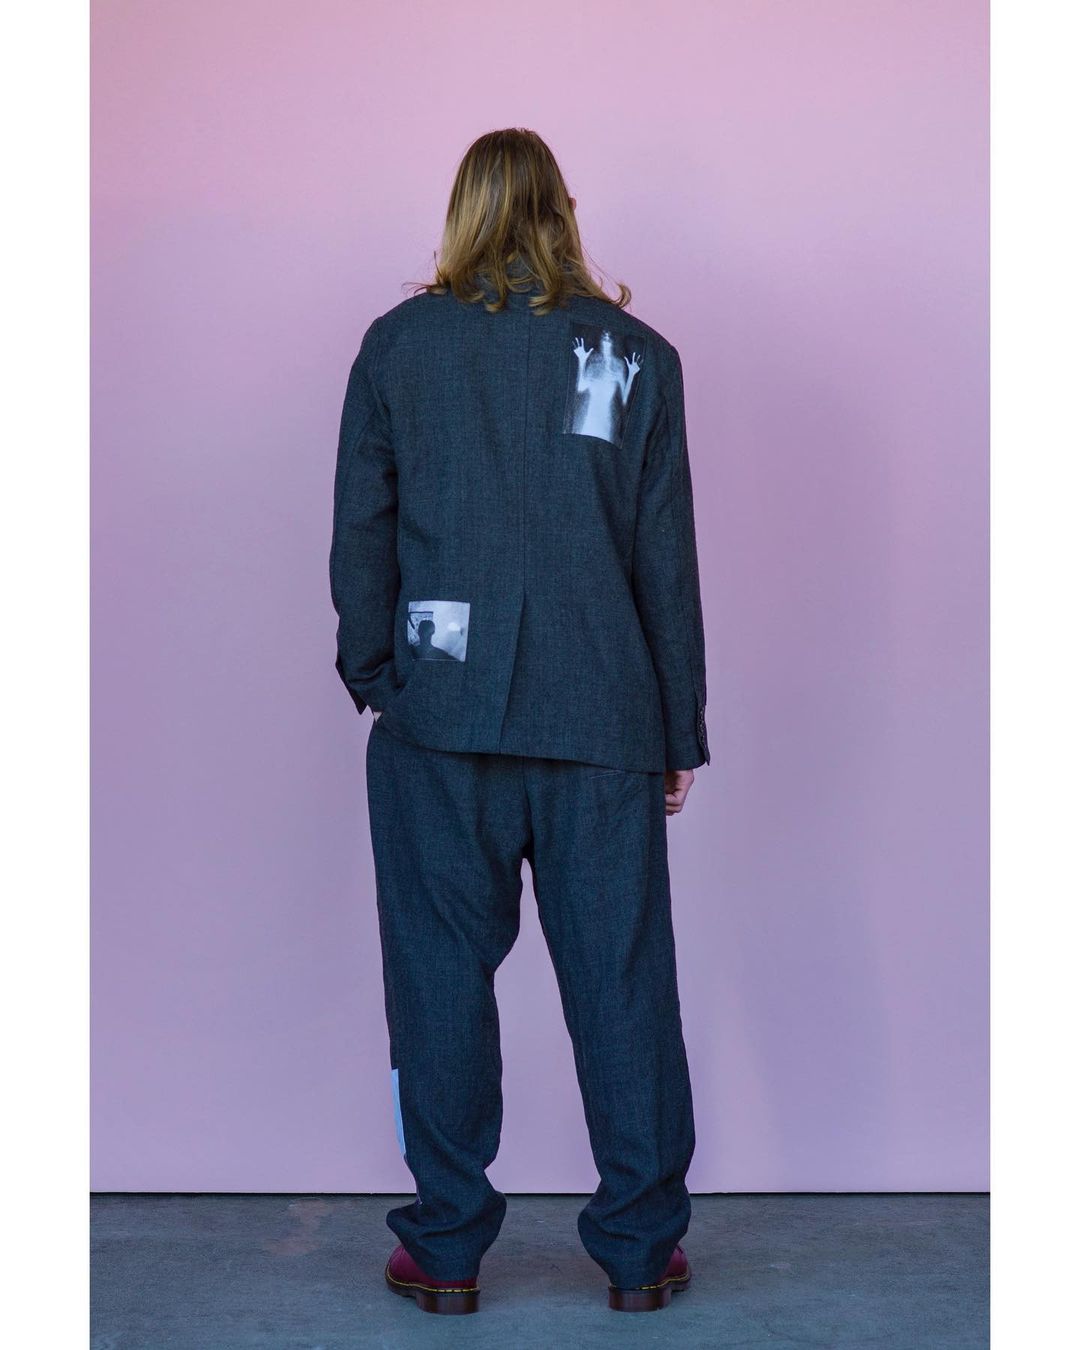 UNDERCOVER Alfred Hitchcock FALL WINTER 2022 COLLECTION